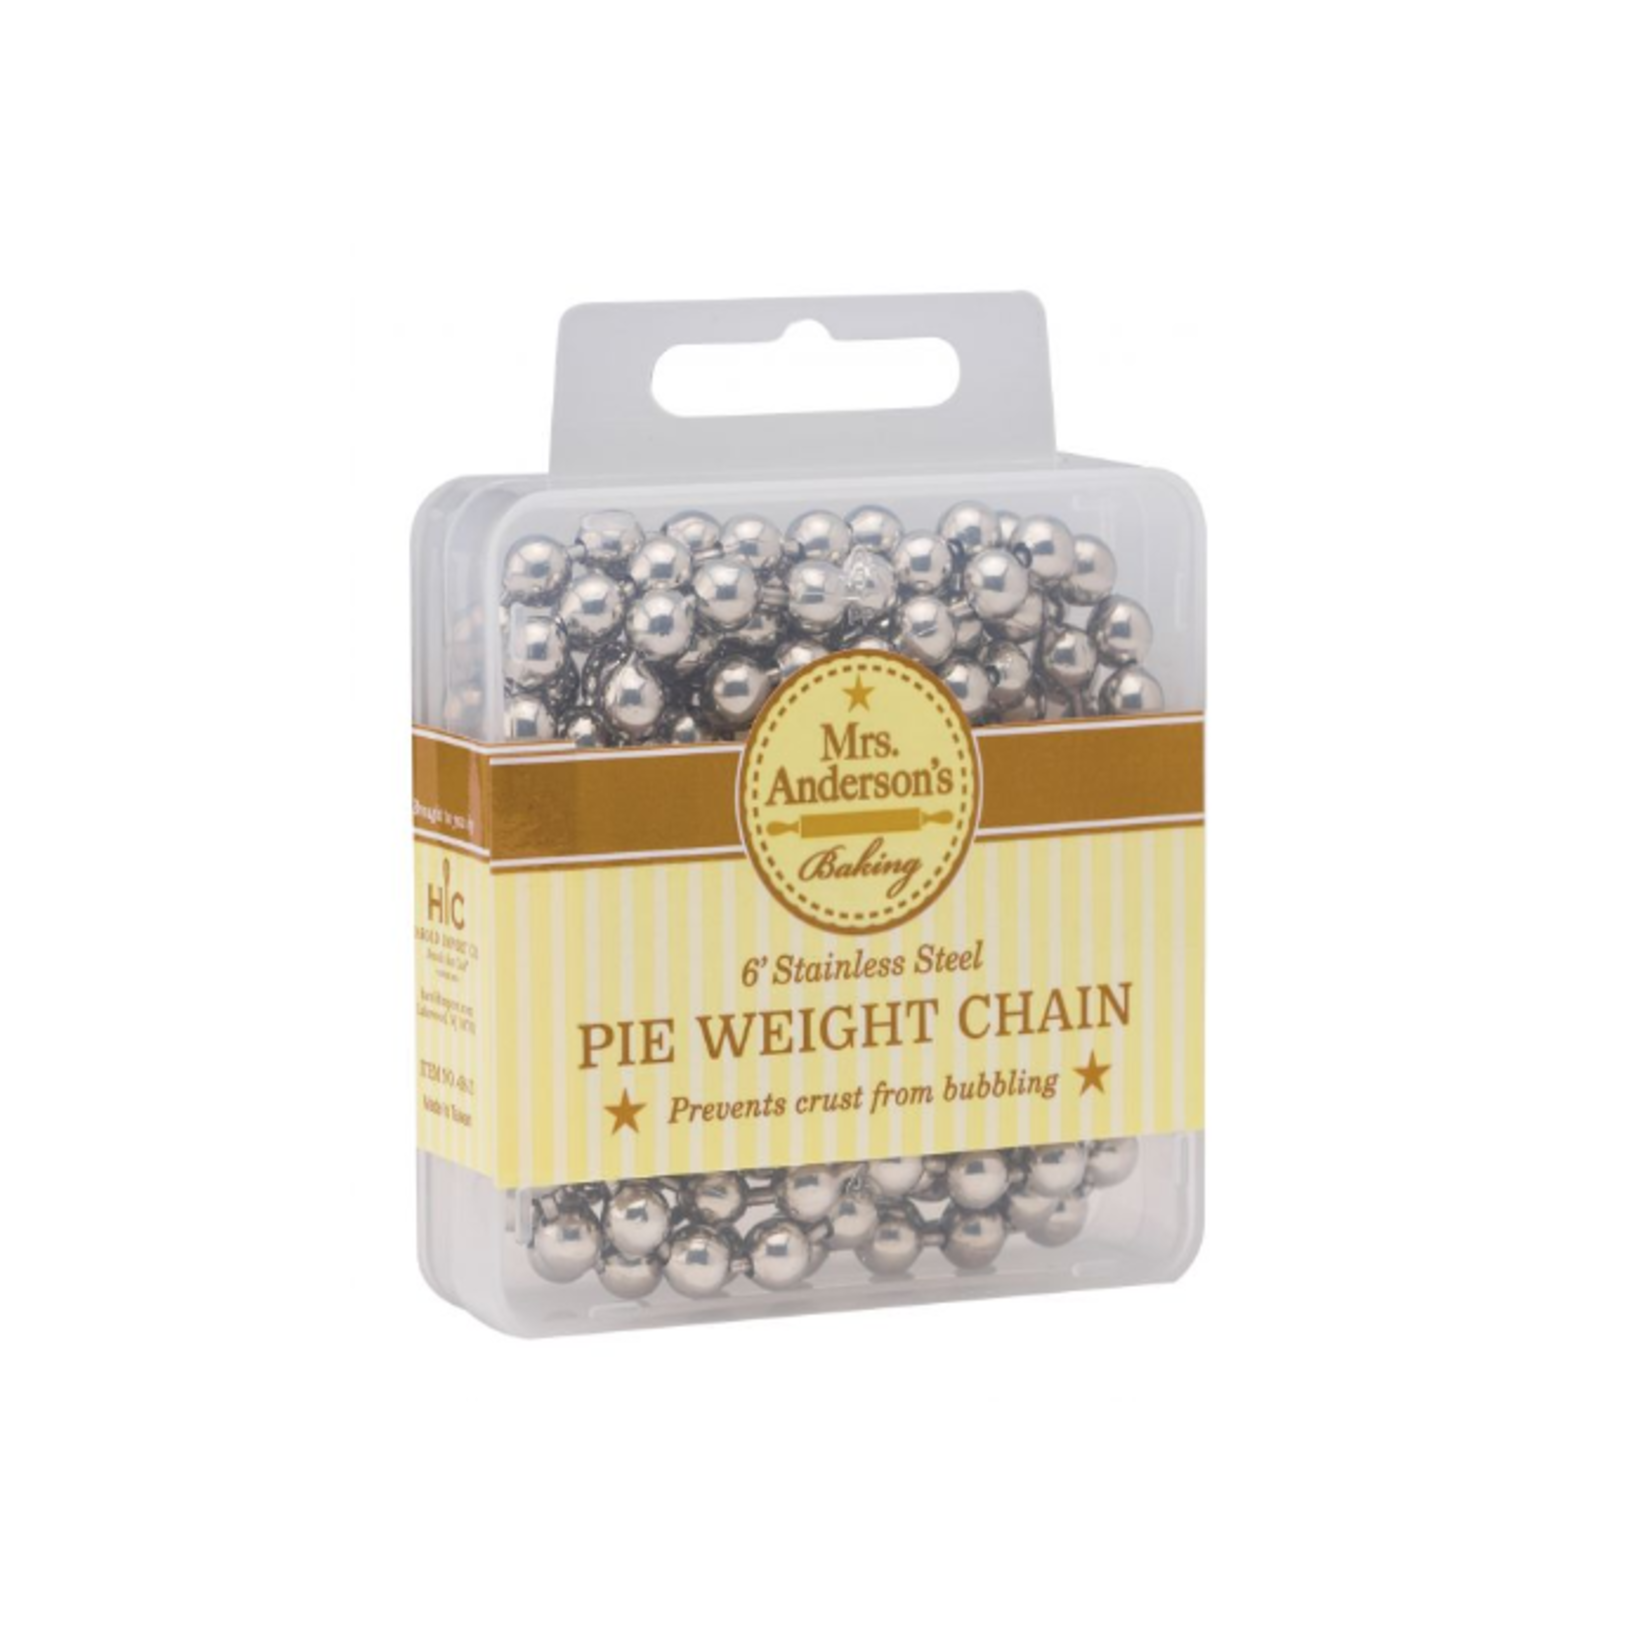 Harold Import Company Inc. Pie Weight Chain